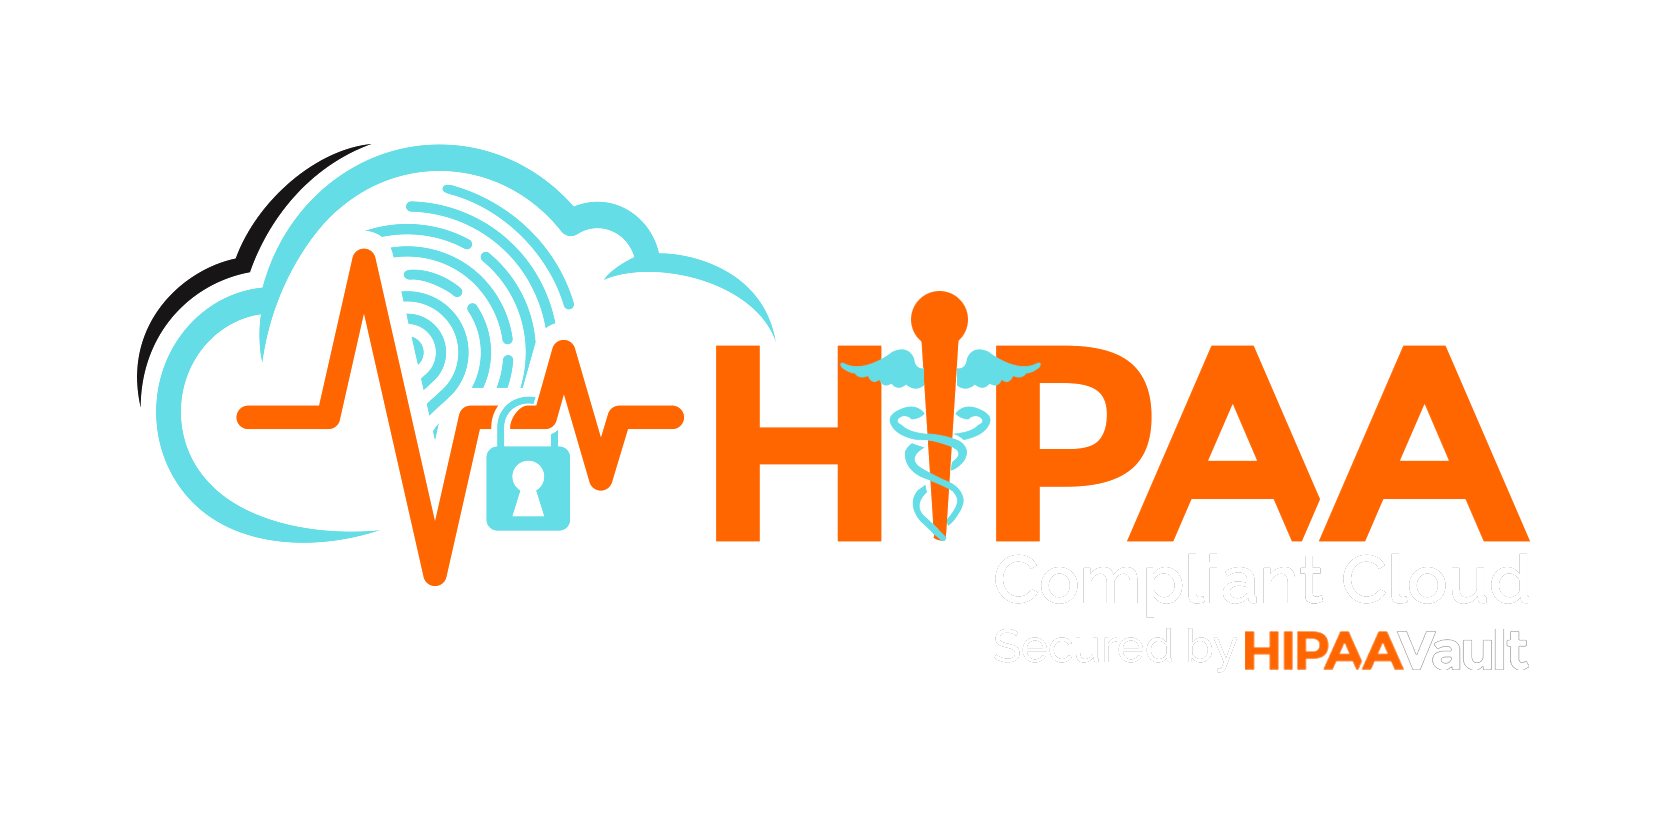 Secured by HIPAAVault